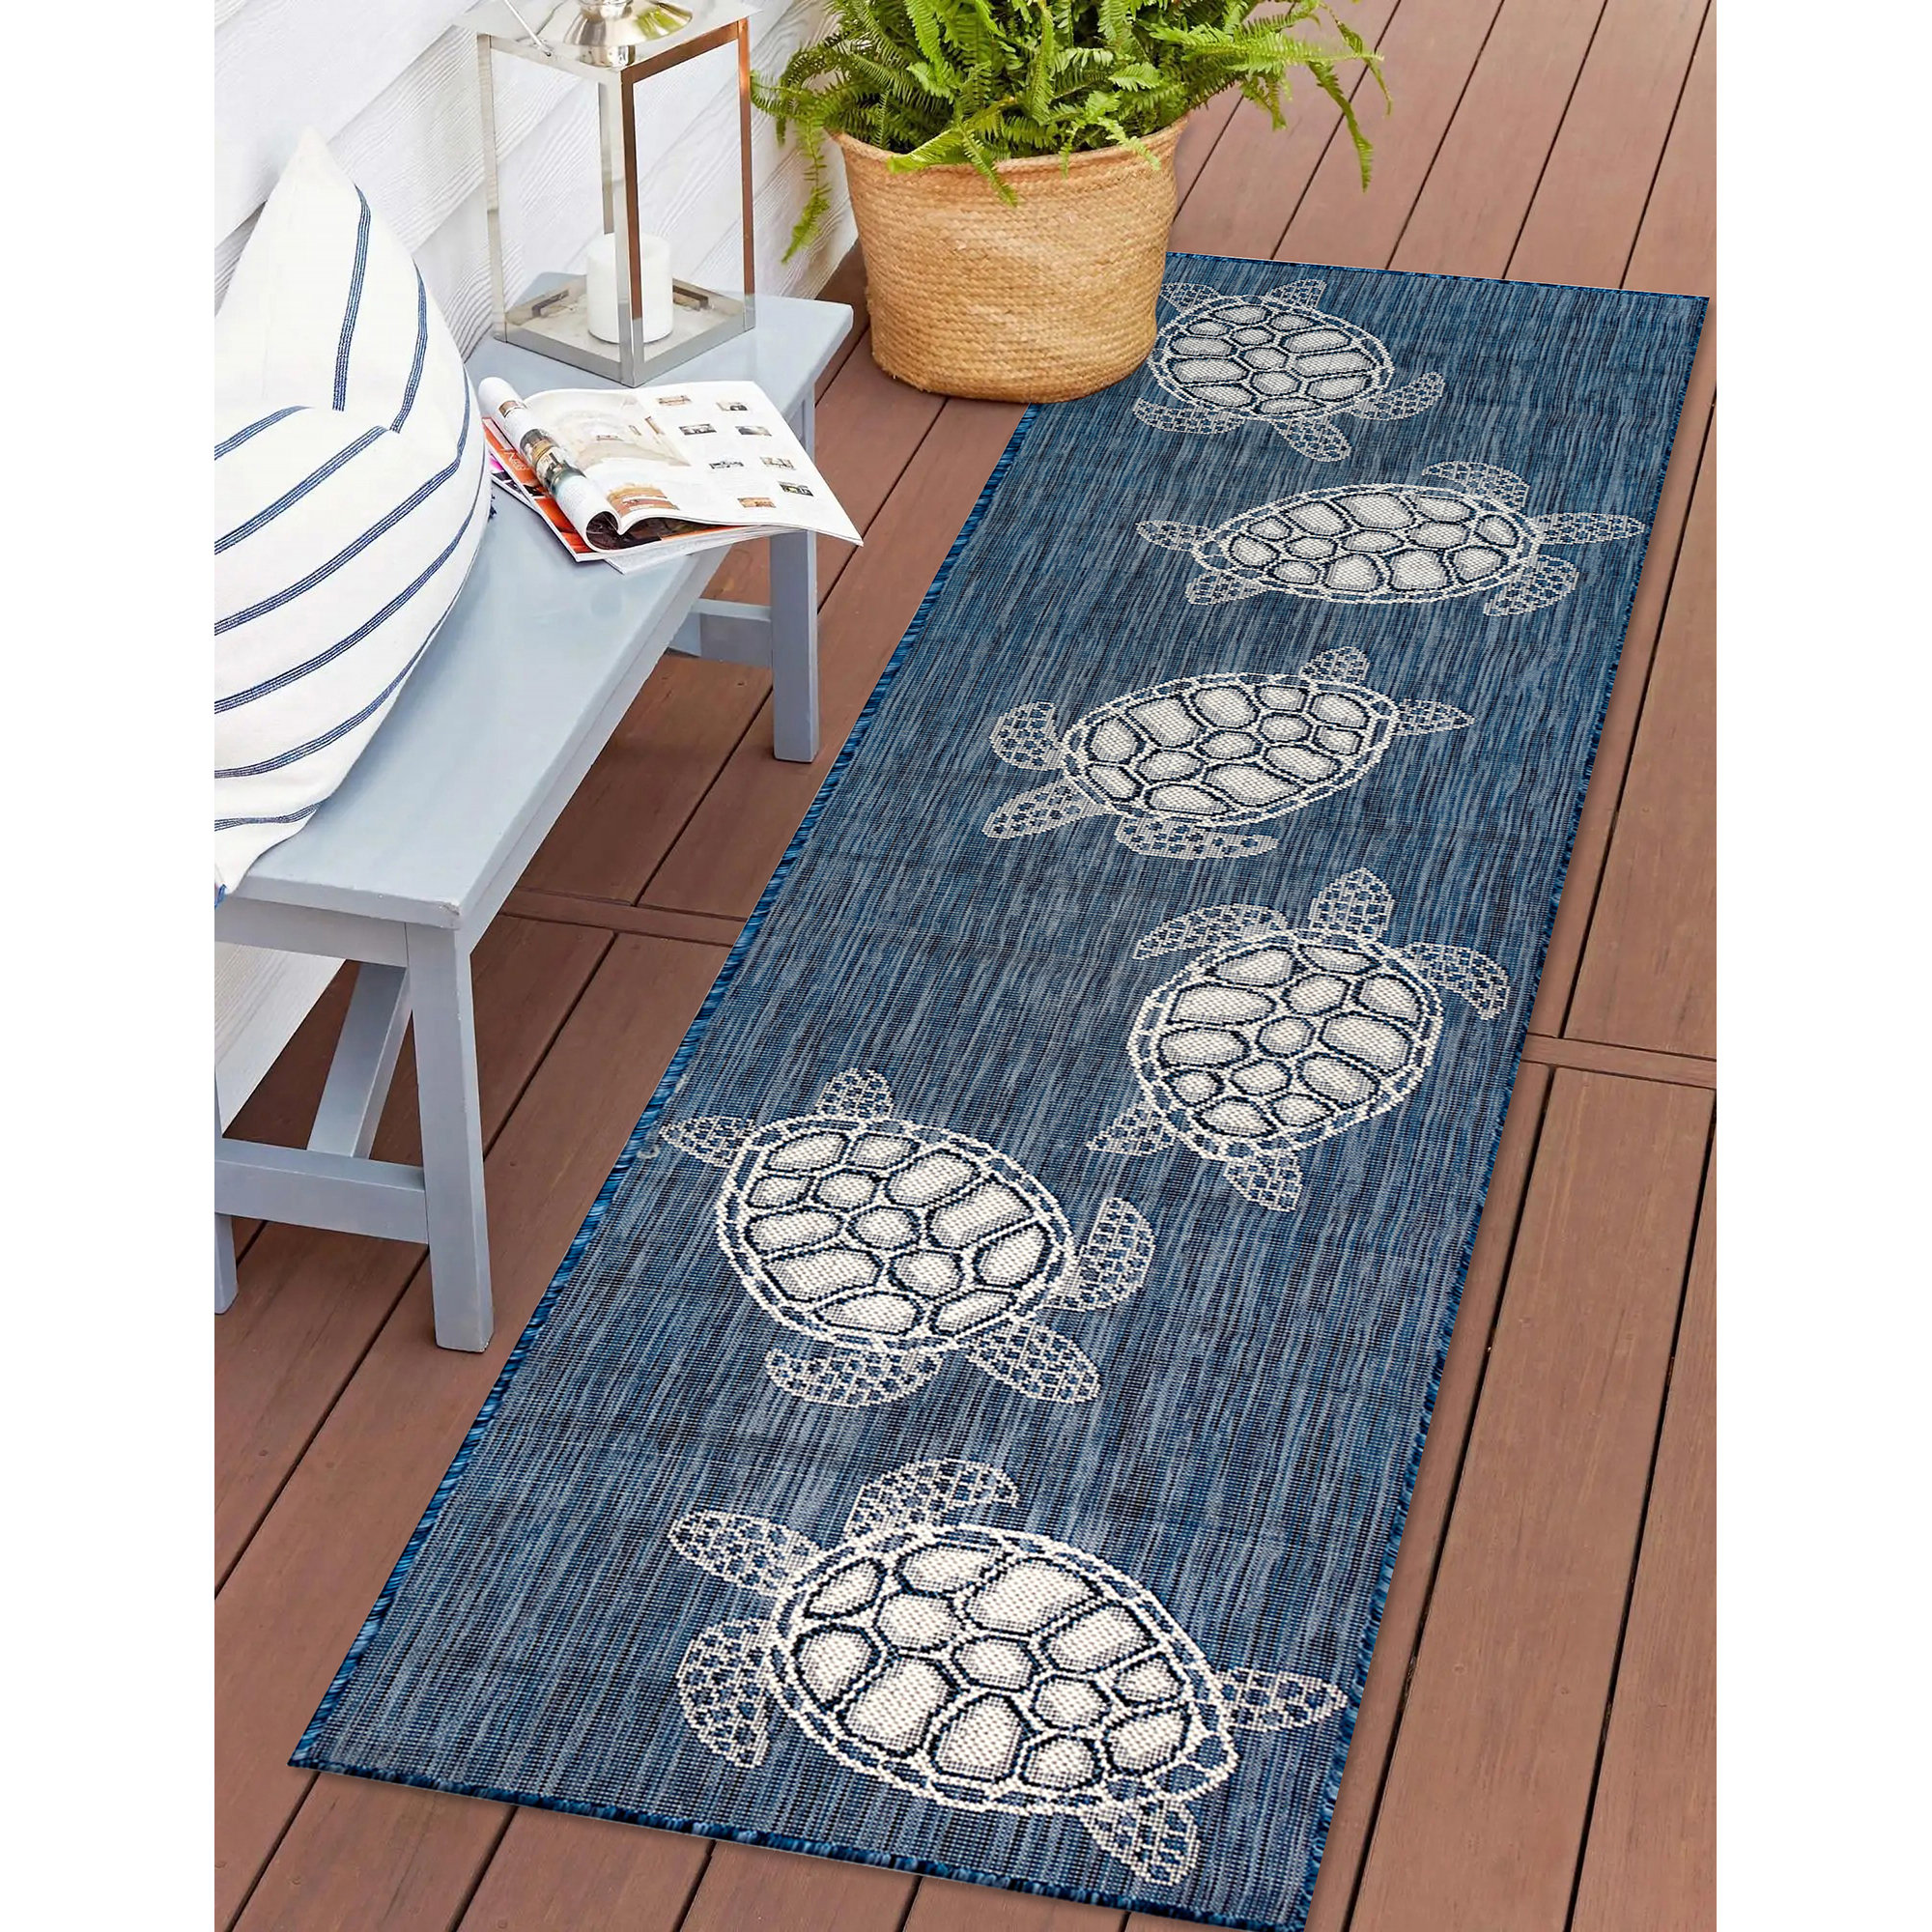 18" x 30" ACCENT PRINTED RUG blue by Waverly nonskid back FLOWERS ISADORA 